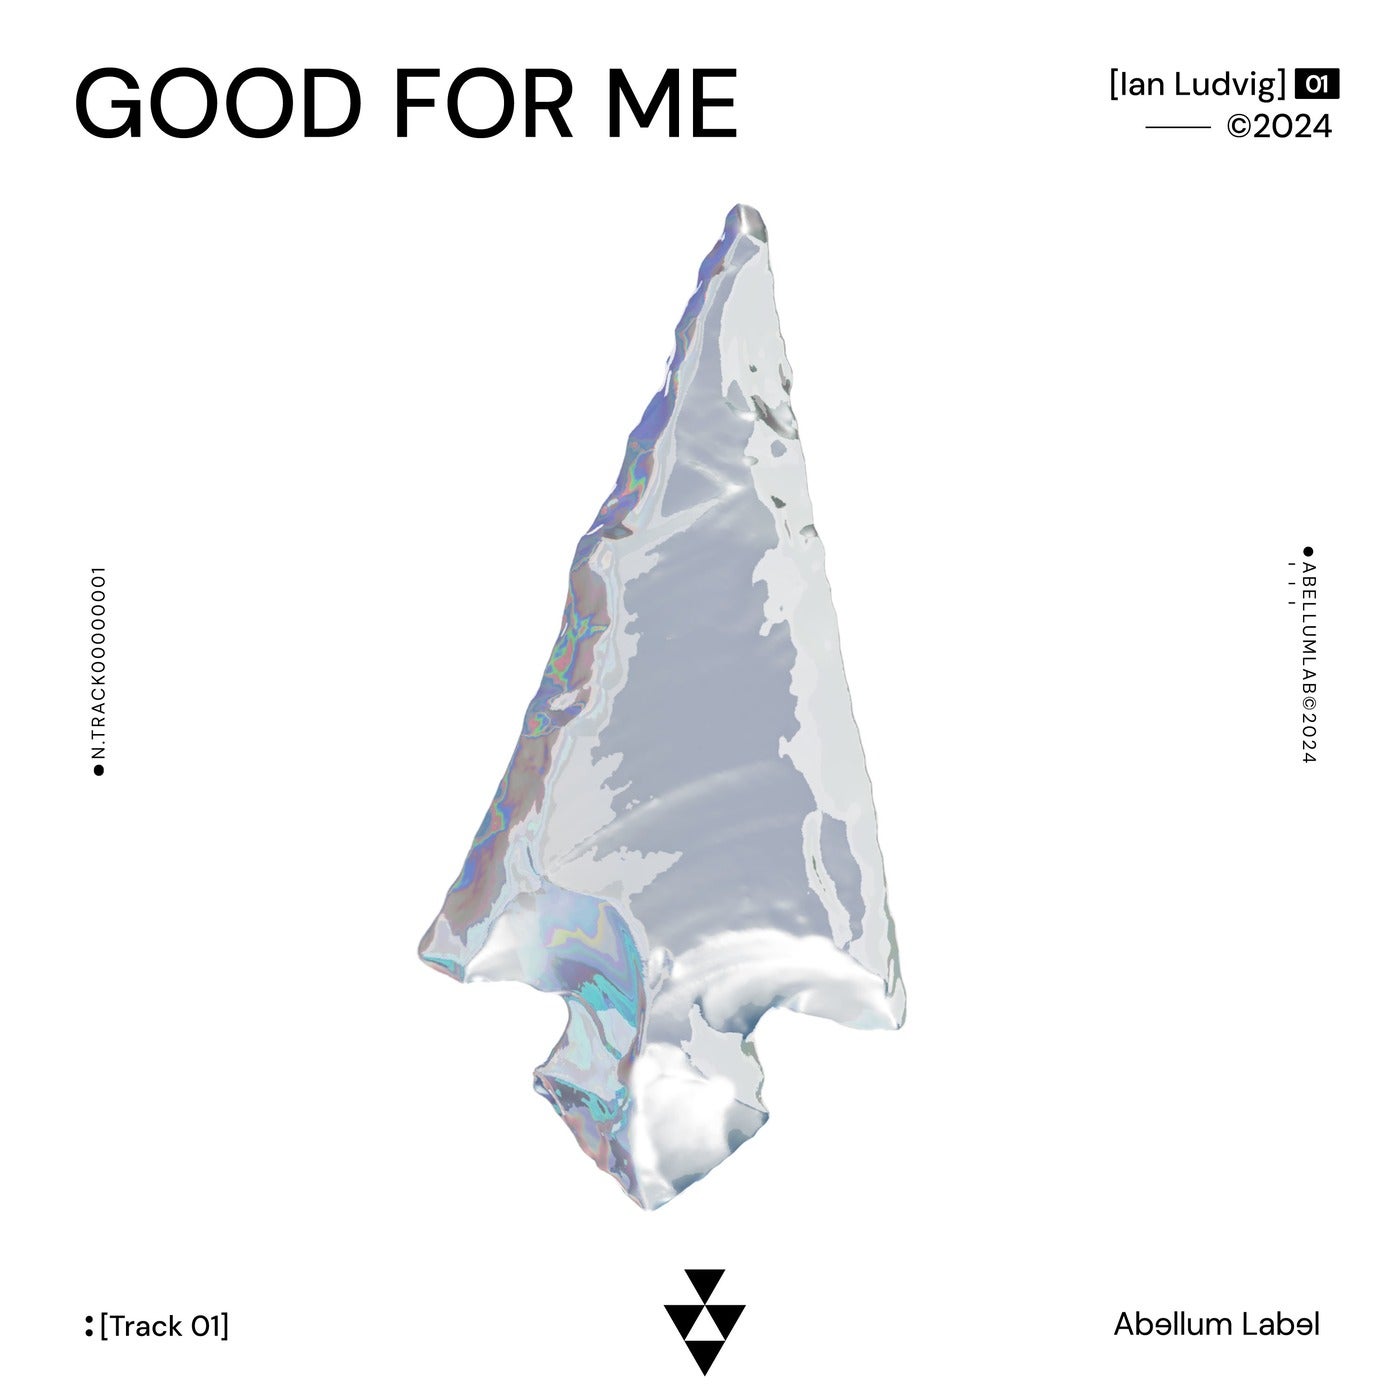 image cover: Ian Ludvig - Good For Me on Abellum